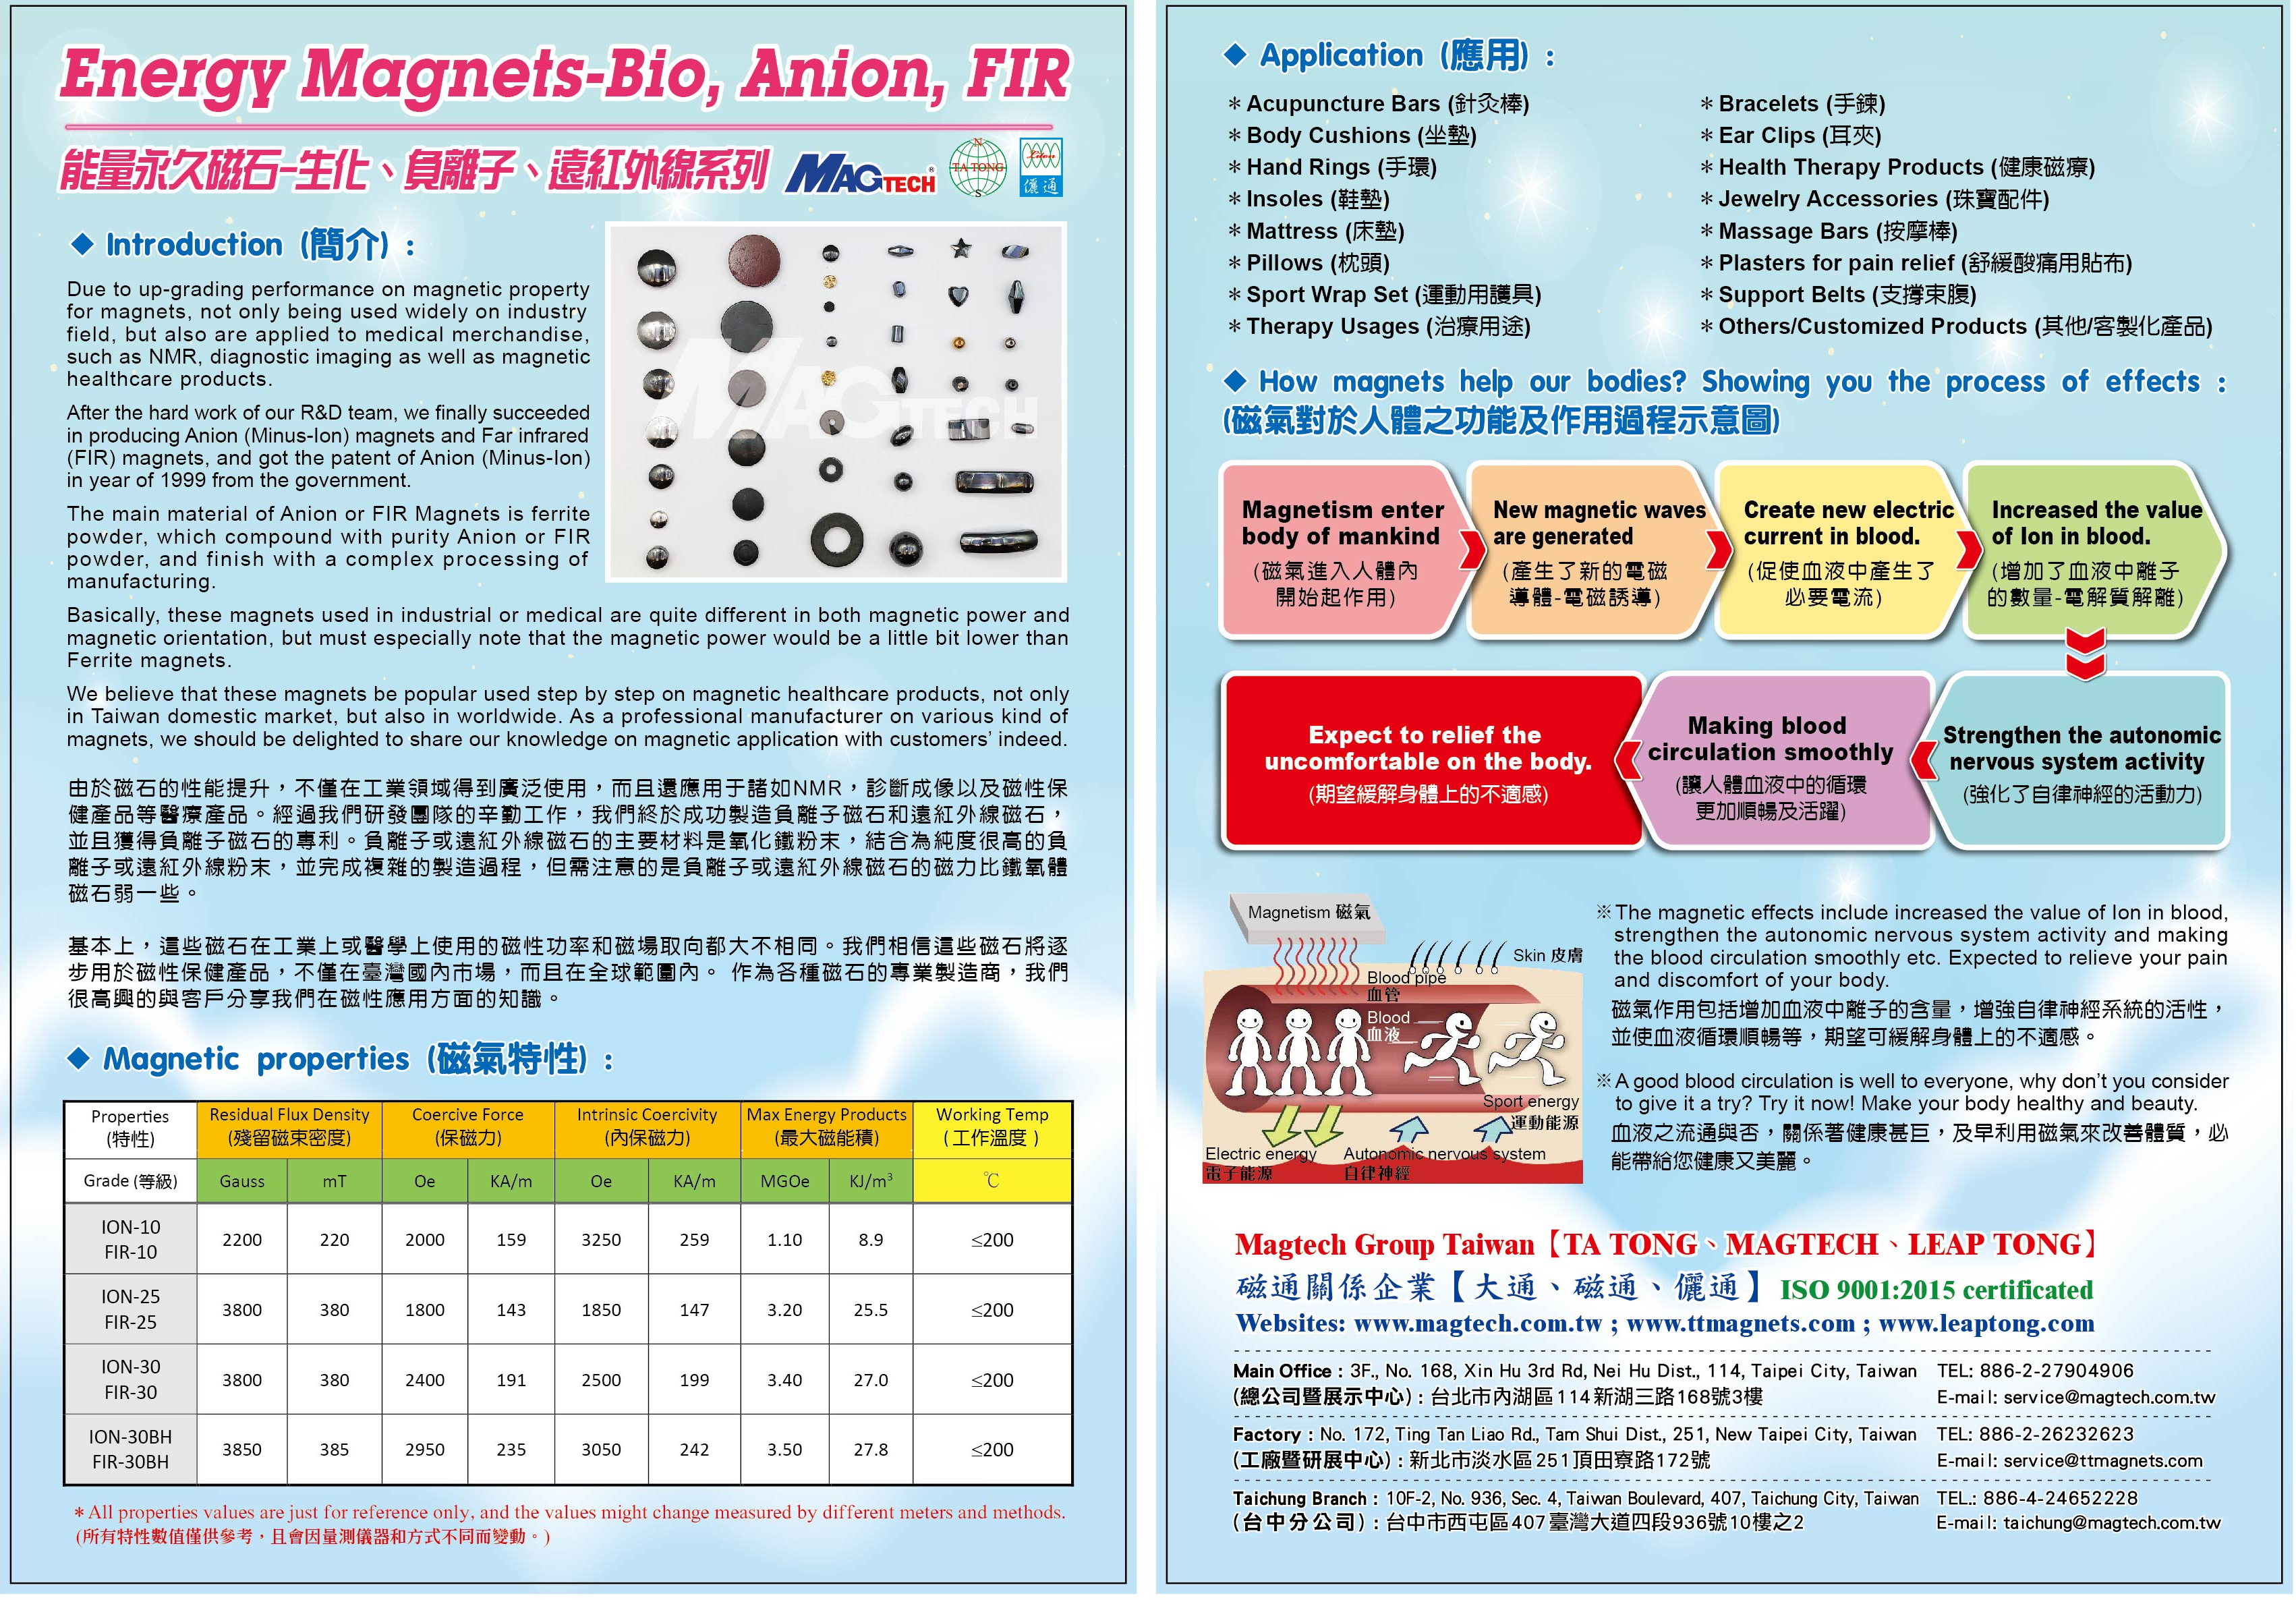 MAGTECH MAGNETIC PRODUCTS CORP. (LEAP TONG) Online Catalogues